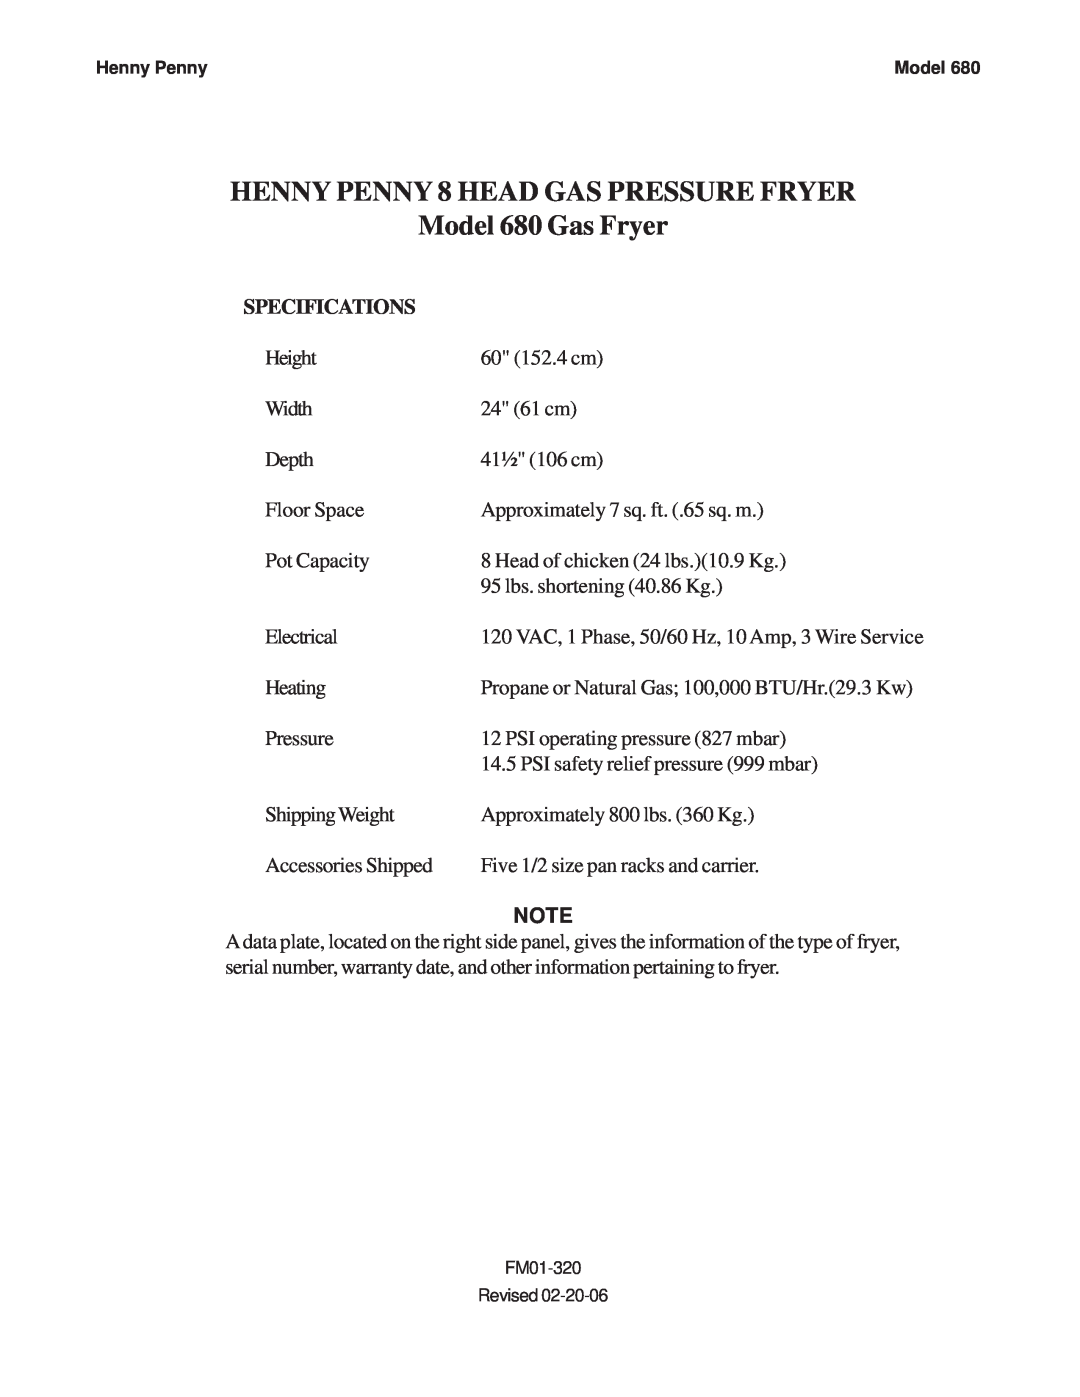 Henny Penny 680 service manual Filter Only When “Cool” Is Displayed 